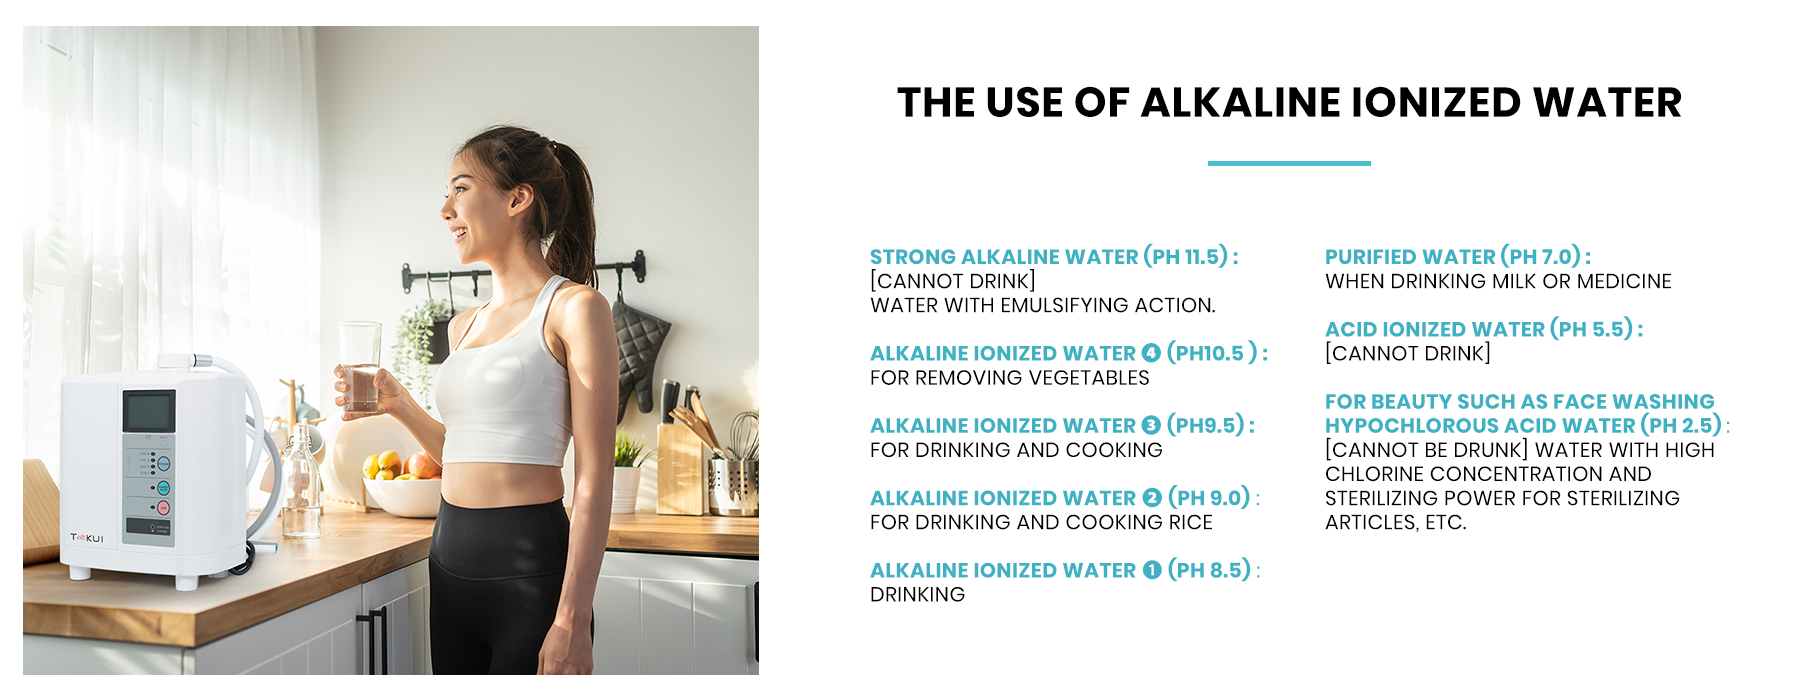 the use of alkaline ionized water from tokui australia